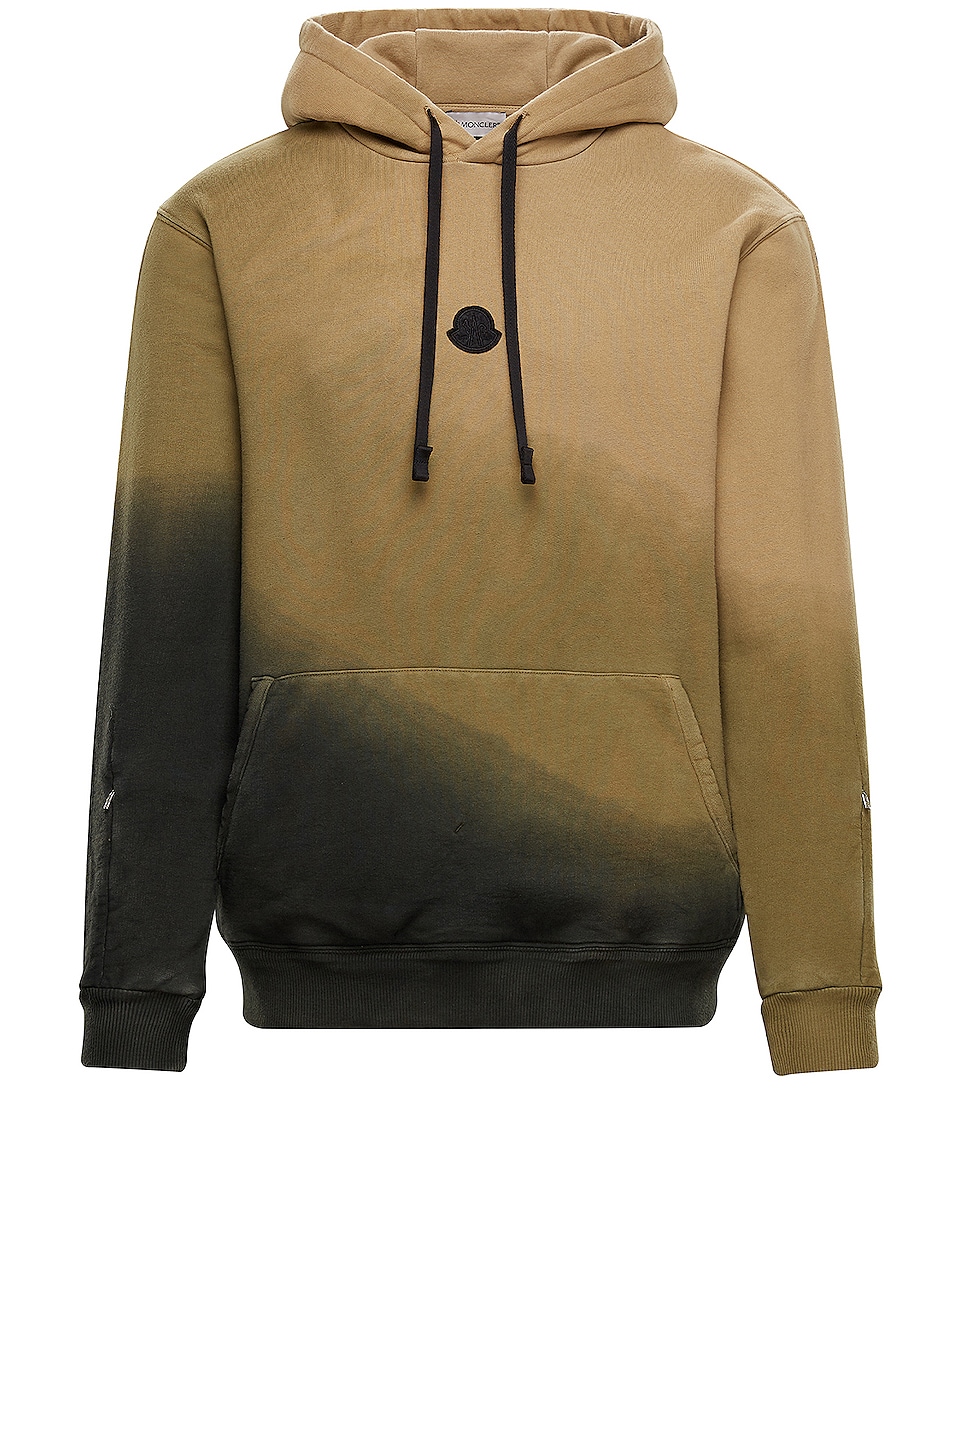 Image 1 of Moncler Genius Moncler Alyx Recycled Fleece Garment Dyed Hoodie in Camel & Black